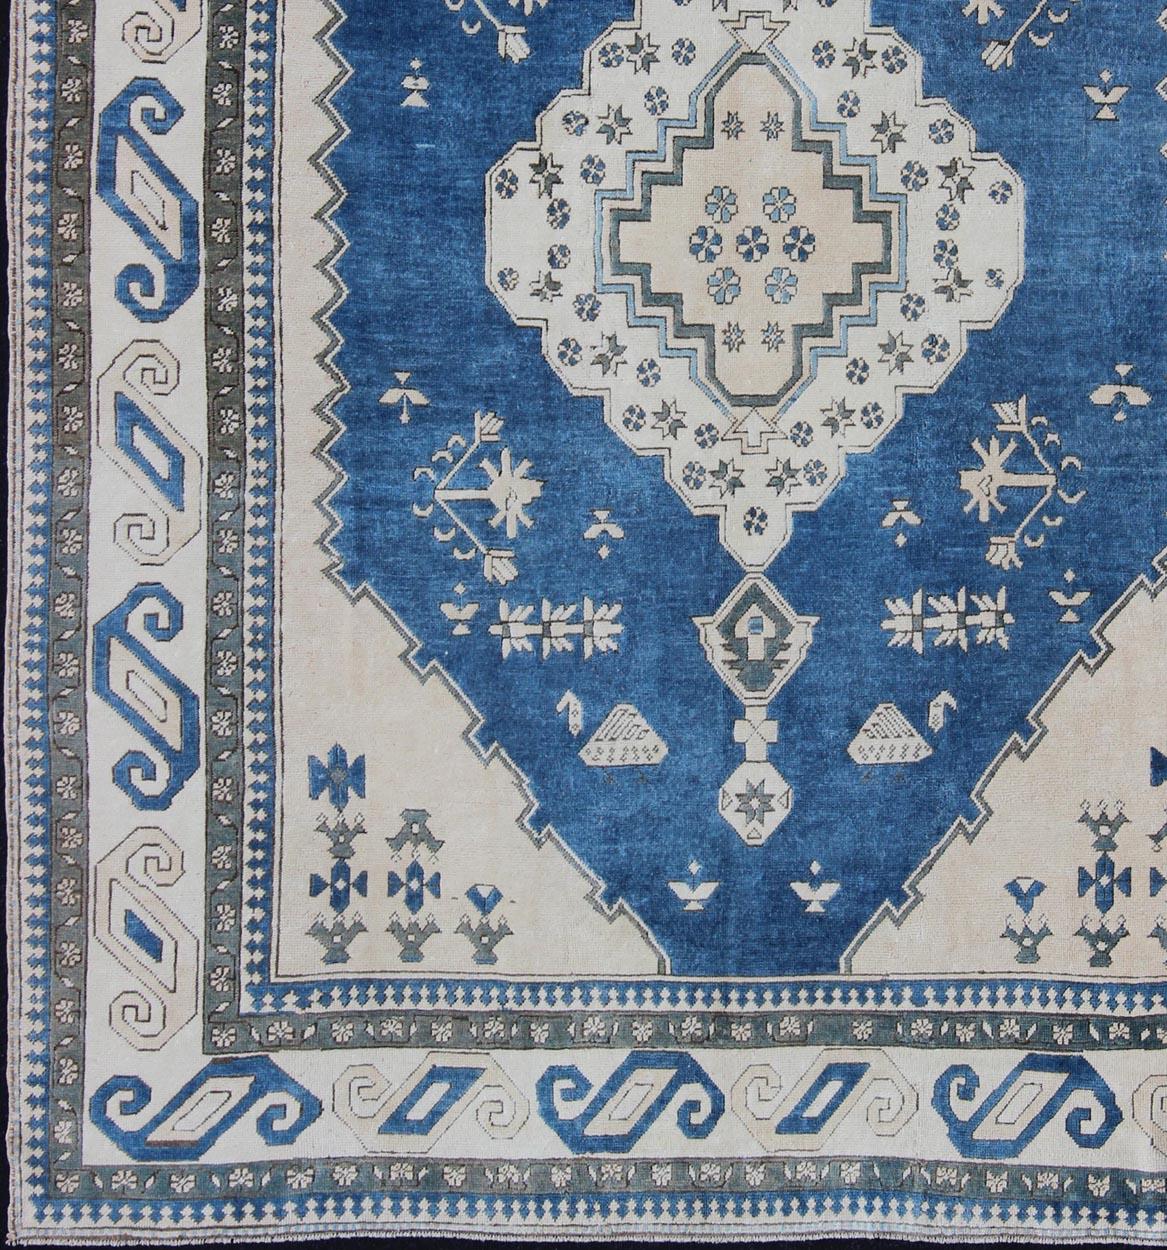 Vintage Oushak carpet with Geometric design, rug en-179331 country of origin / type: Turkey / Oushak, circa 1940.

This vintage Oushak carpet from third quarter of 20th century Turkey features a traditional medallion design rendered in tones of blue